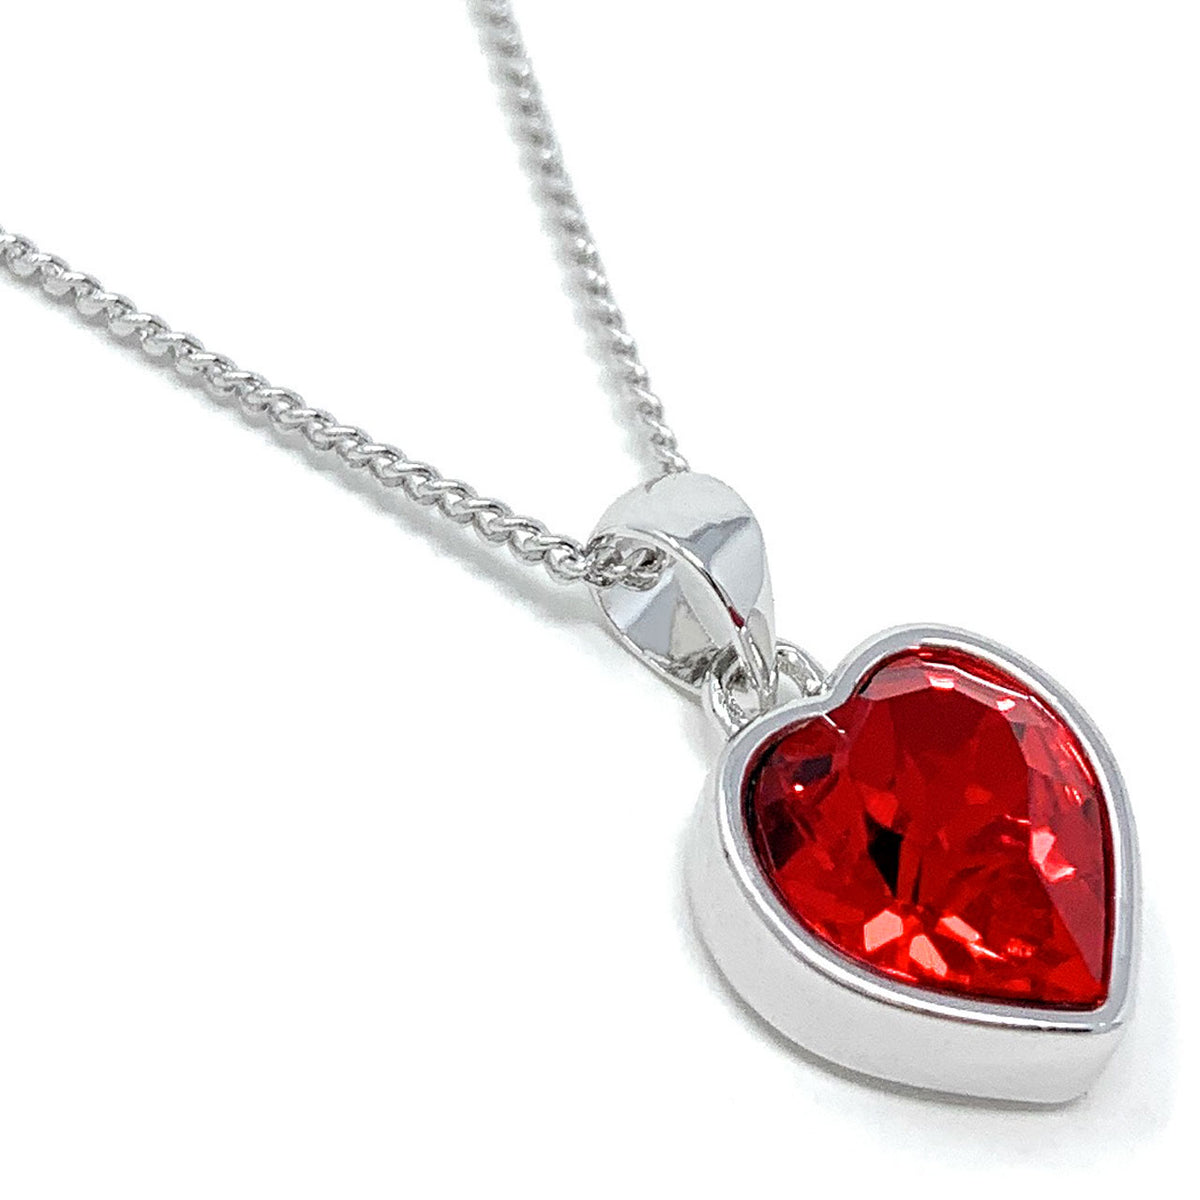 Lucia Pendant Necklace with Red Light Siam Heart Crystals from Swarovski Silver Toned Rhodium Plated - Ed Heart